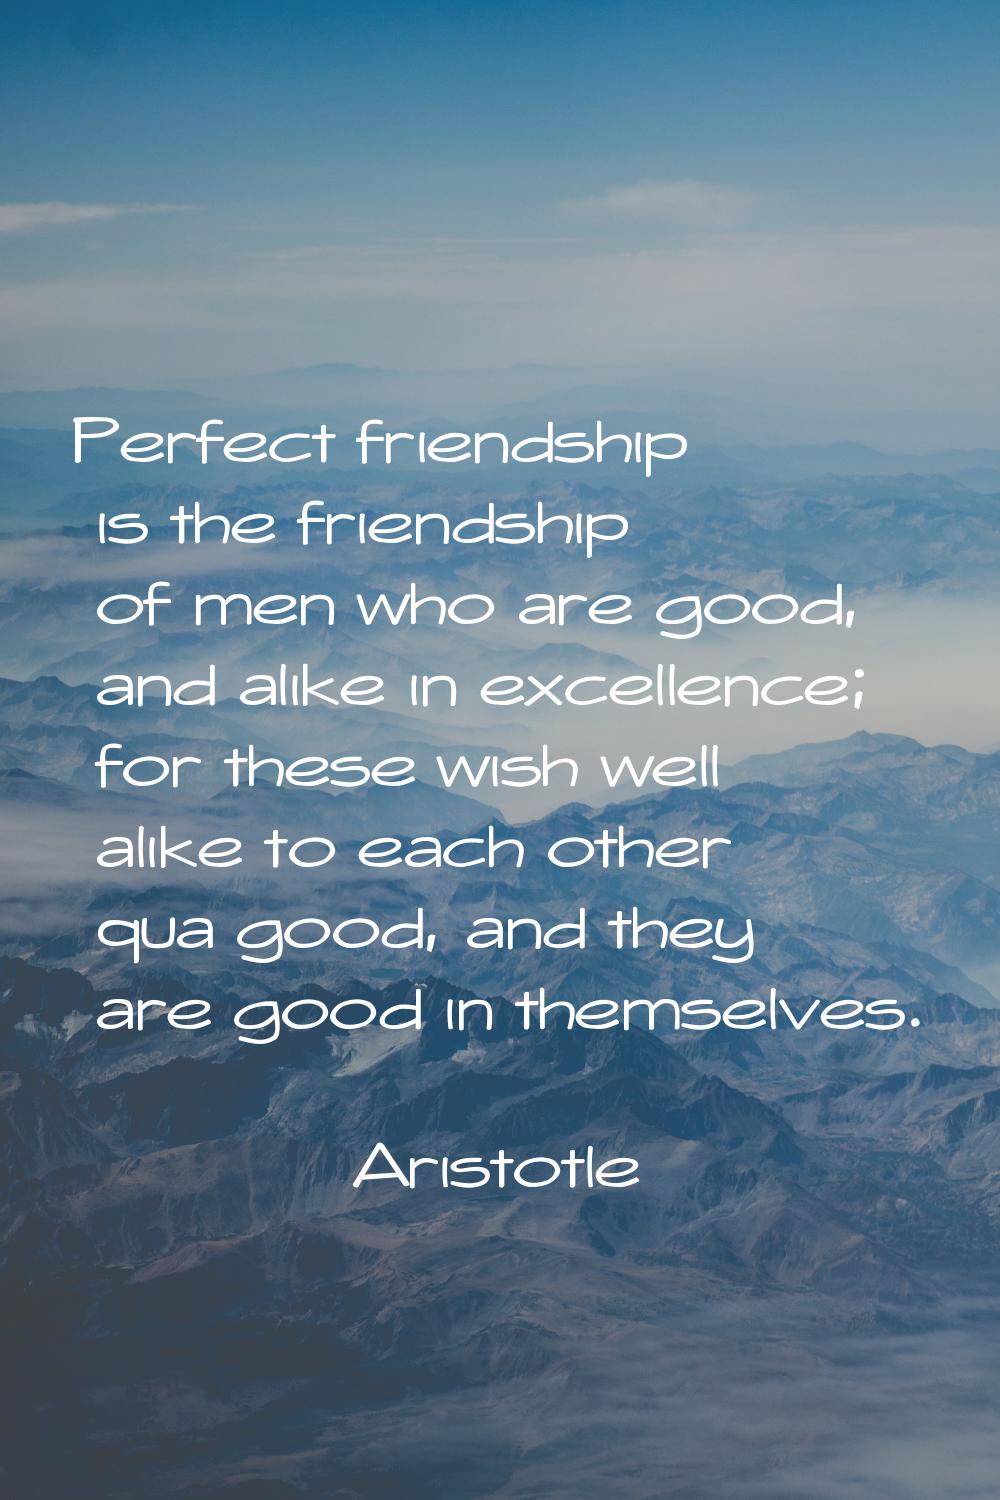 Perfect friendship is the friendship of men who are good, and alike in excellence; for these wish w